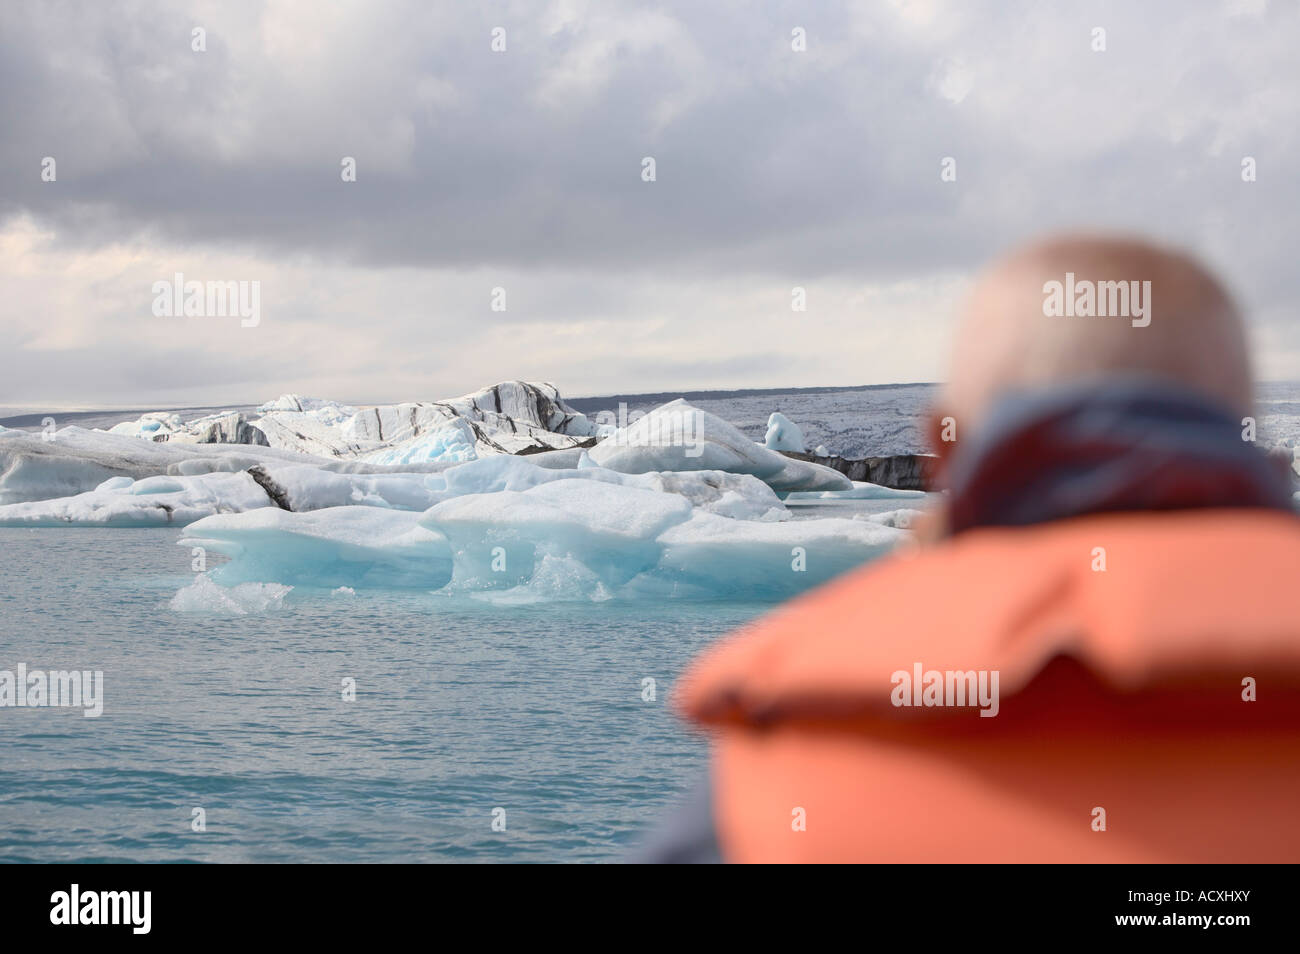 A tourist watching icebergs in the Jokulsarlon glacial lagoon in the Skaftafell National Park, Iceland Stock Photo